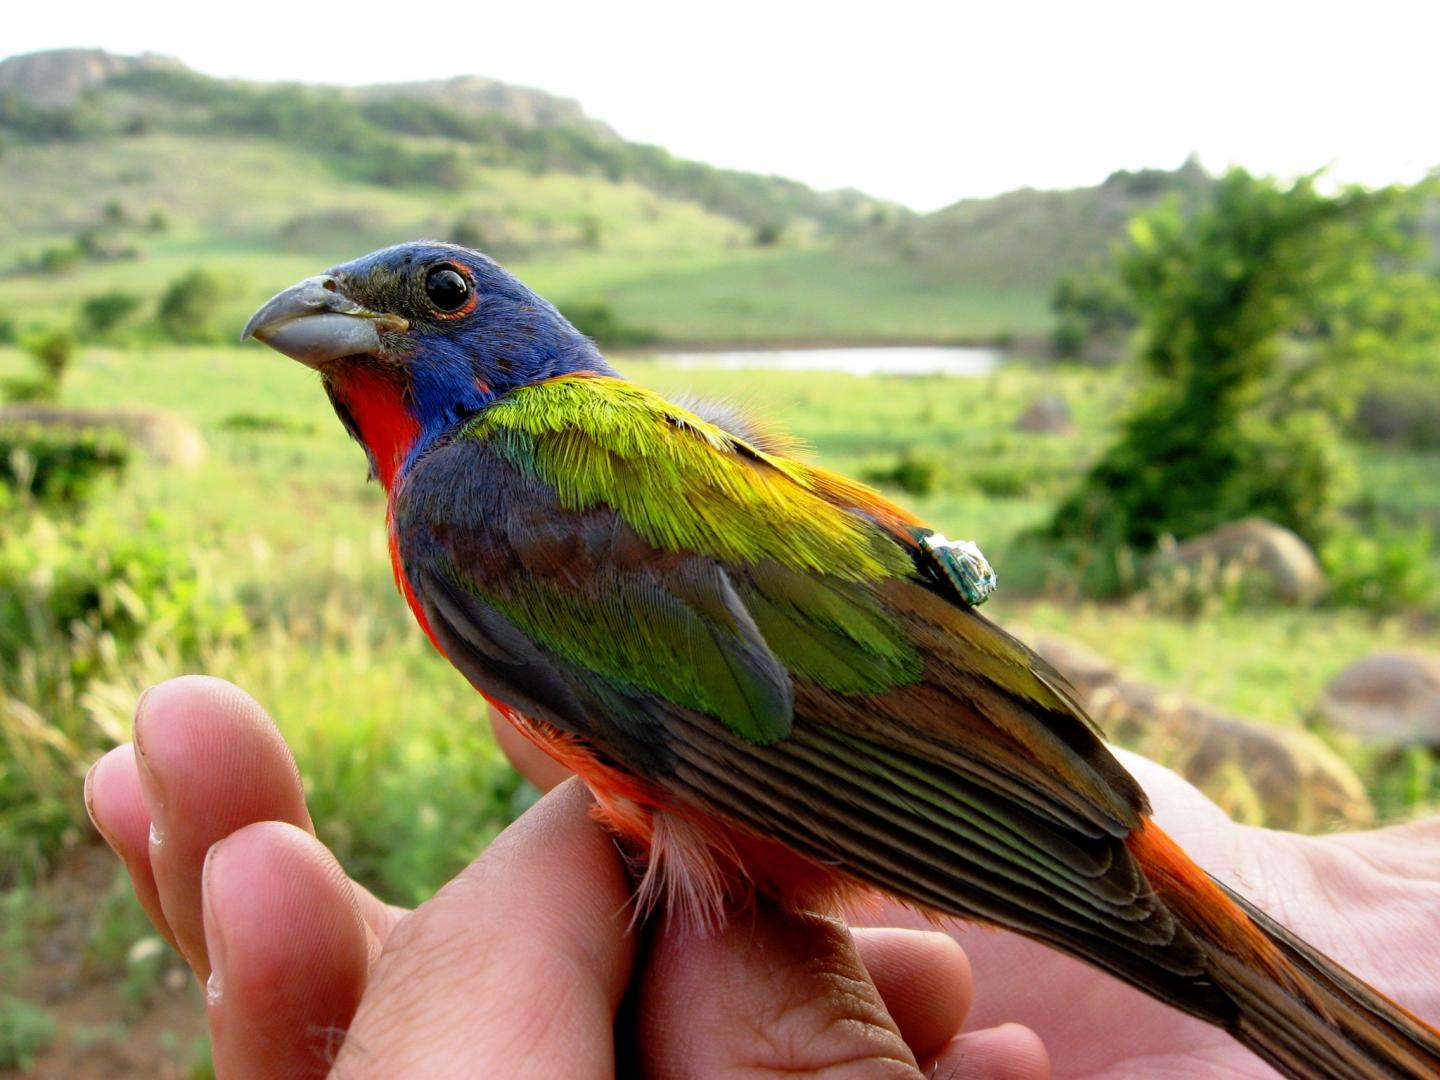 Painted Bunting, a Neotropical Migratory Songbird